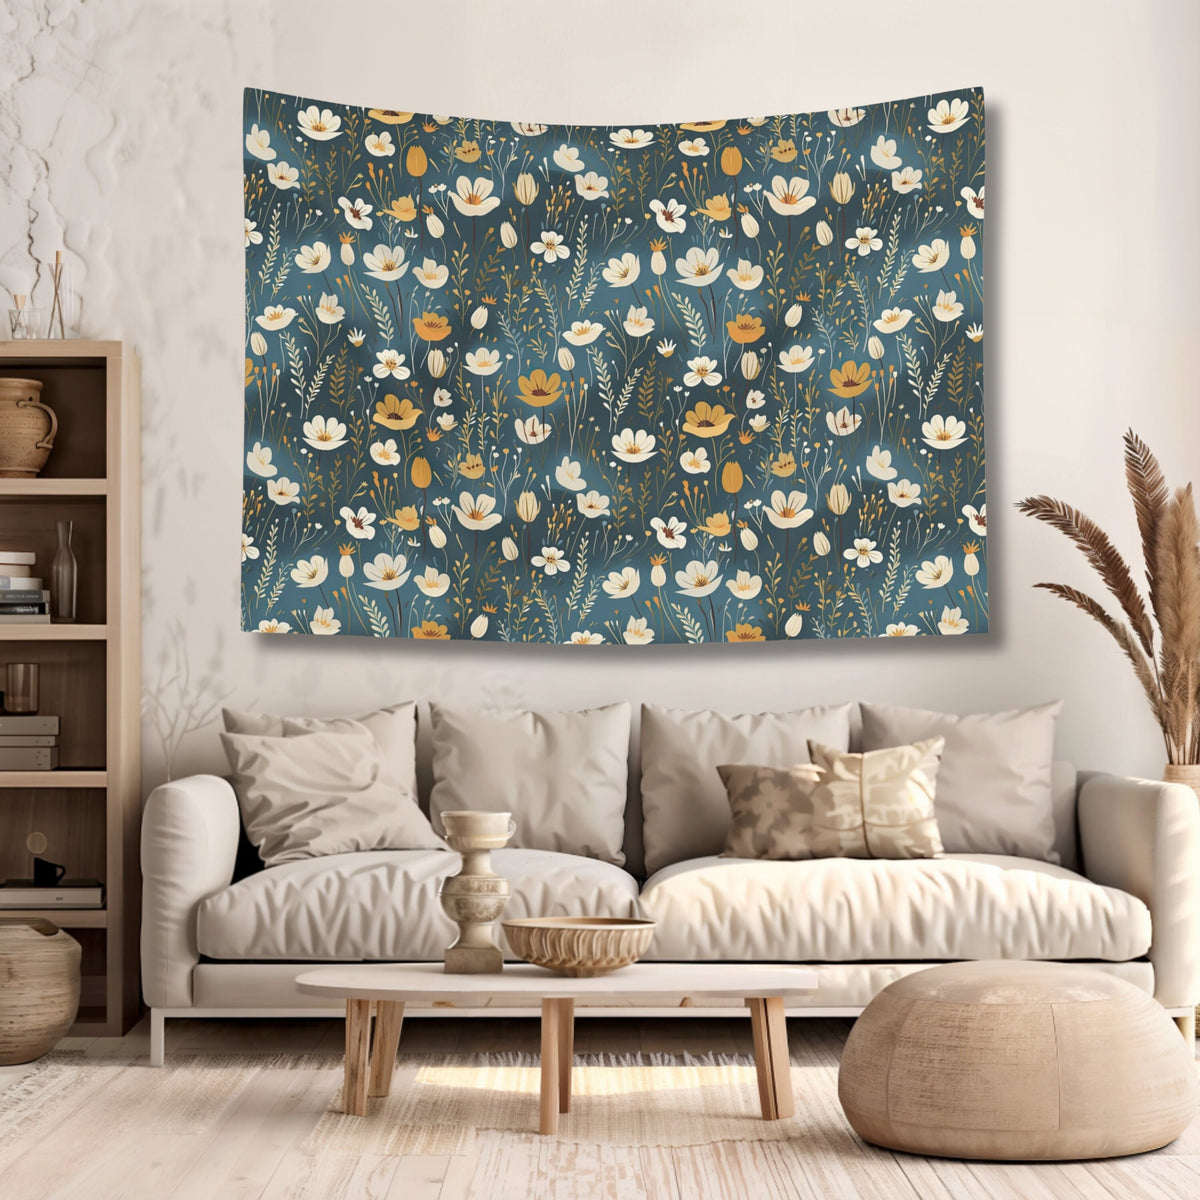 Boho Living Room Decor Boho Aesthetic Wall Hanging Tapestry Wildflower Cottagecore Decor Bedroom Garden Canvas Tapestry Large Wildflower